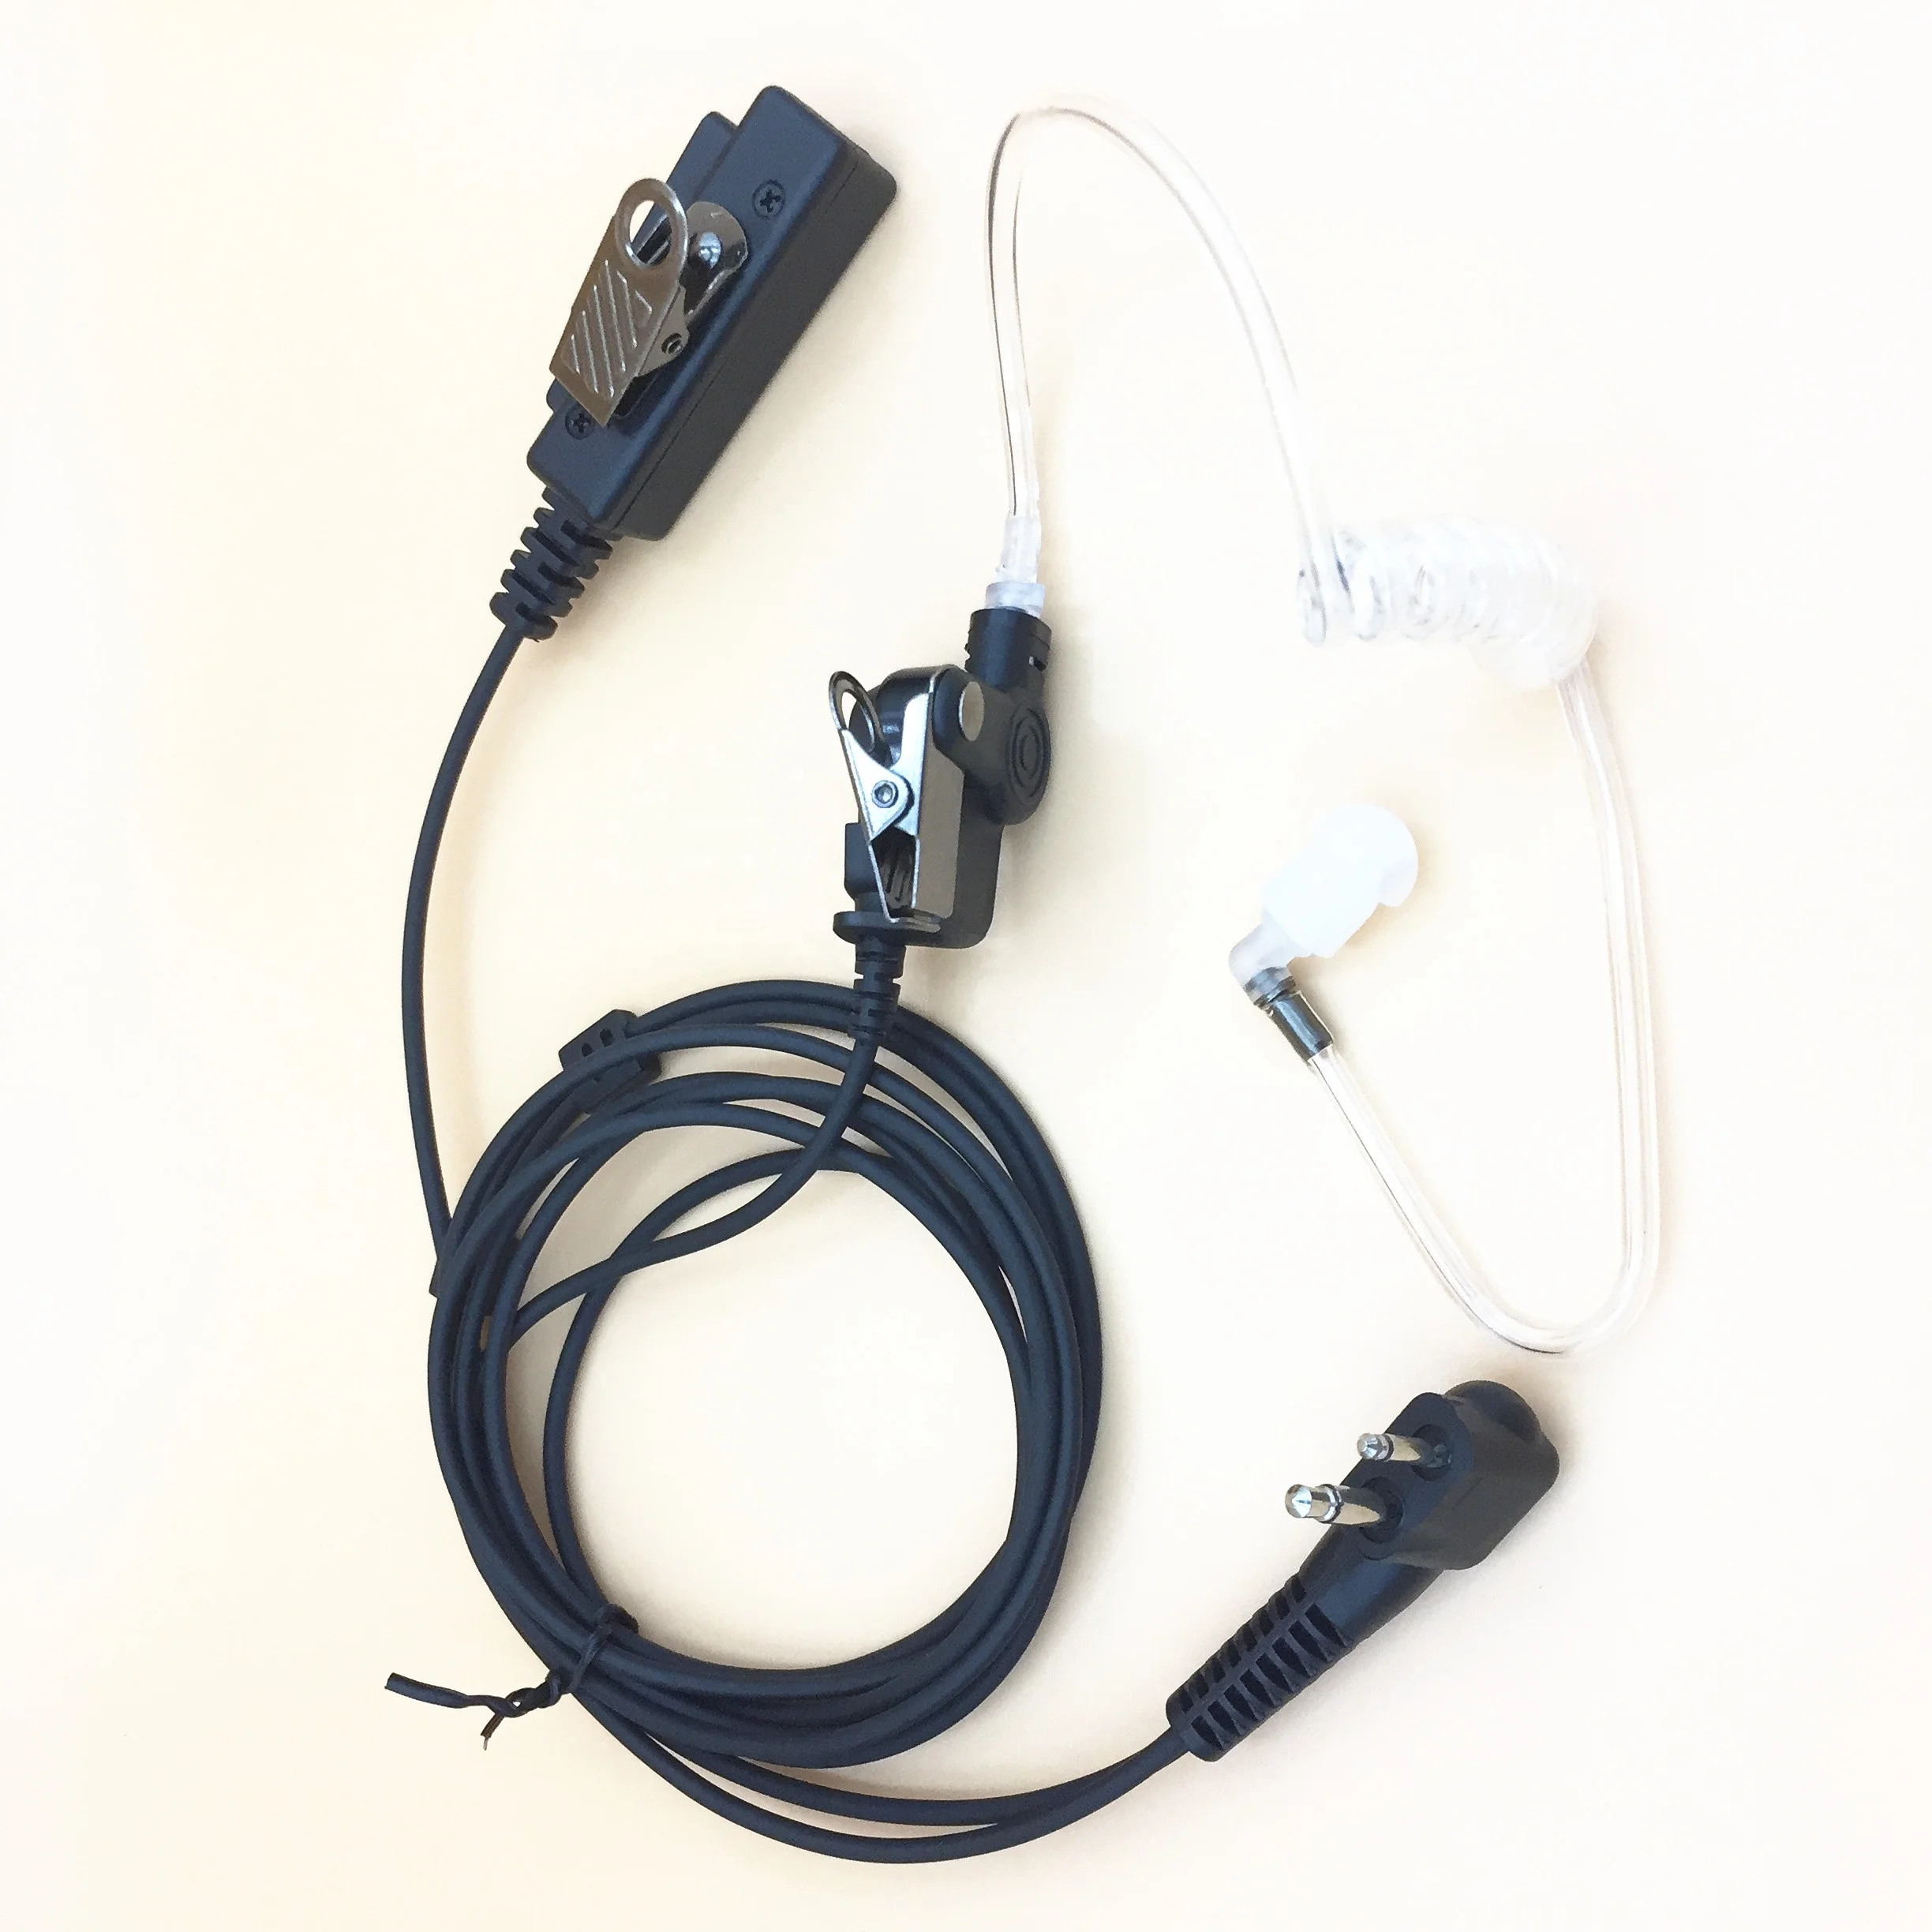 

RISENKE Walkie Talkie Earpiece with Mic Acoustic Tube Compatible with Motorola CLS1410 CLS1110 CP040 CP100 CP110 GP300